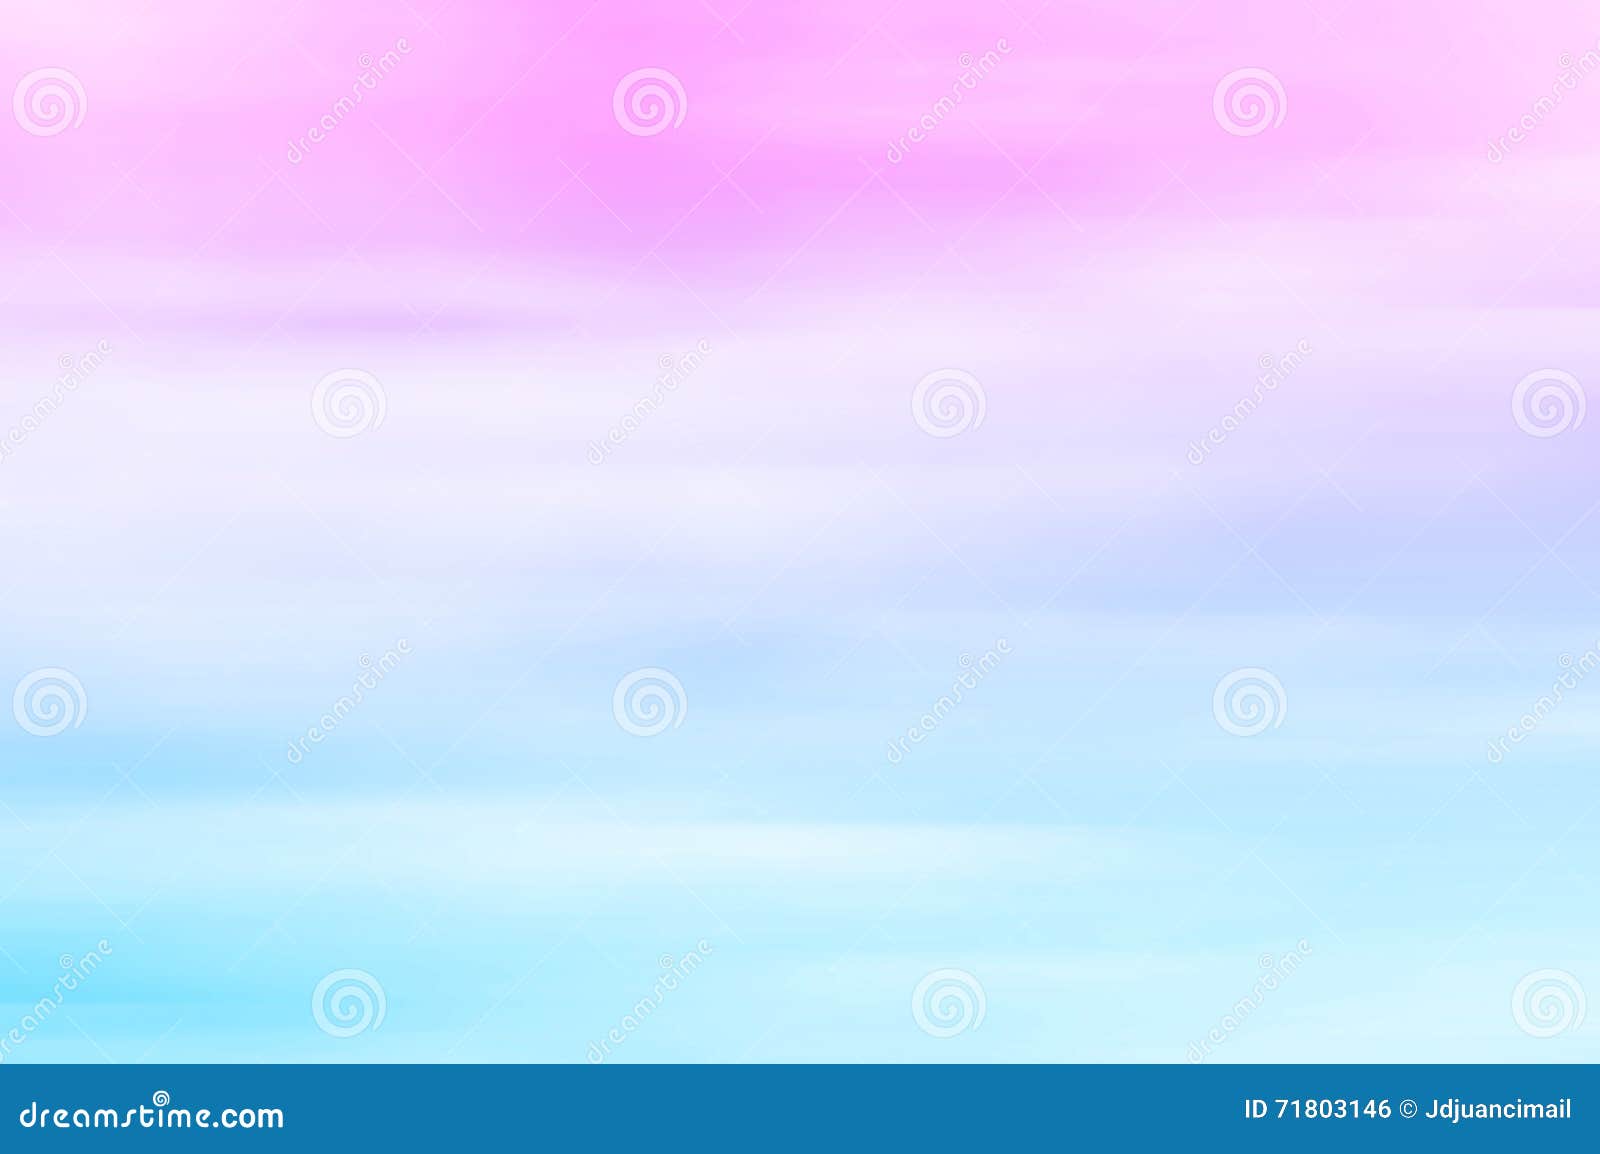 blurred sky at sunset. pink to blue, pastel tones, gradient